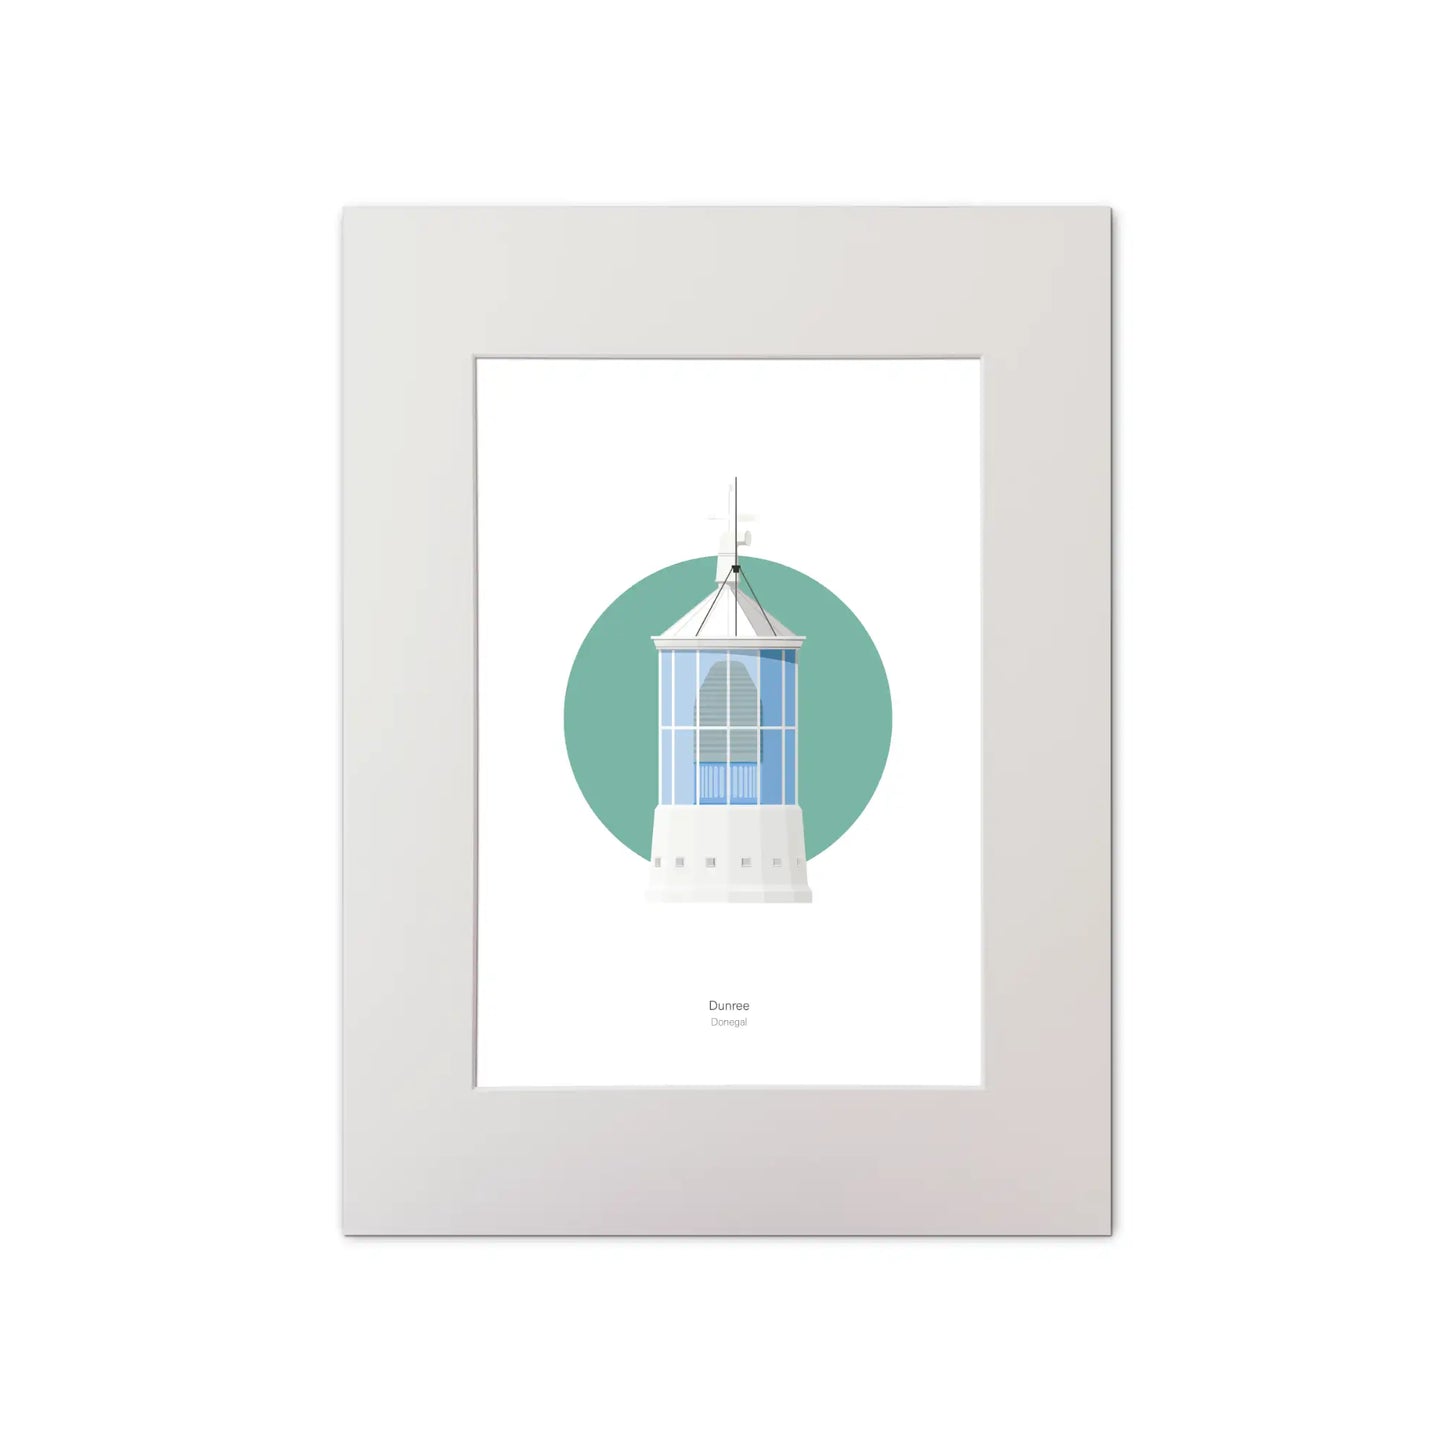 Contemporary graphic illustration of Dunree lighthouse on a white background inside light blue square, mounted and measuring 30x40cm.